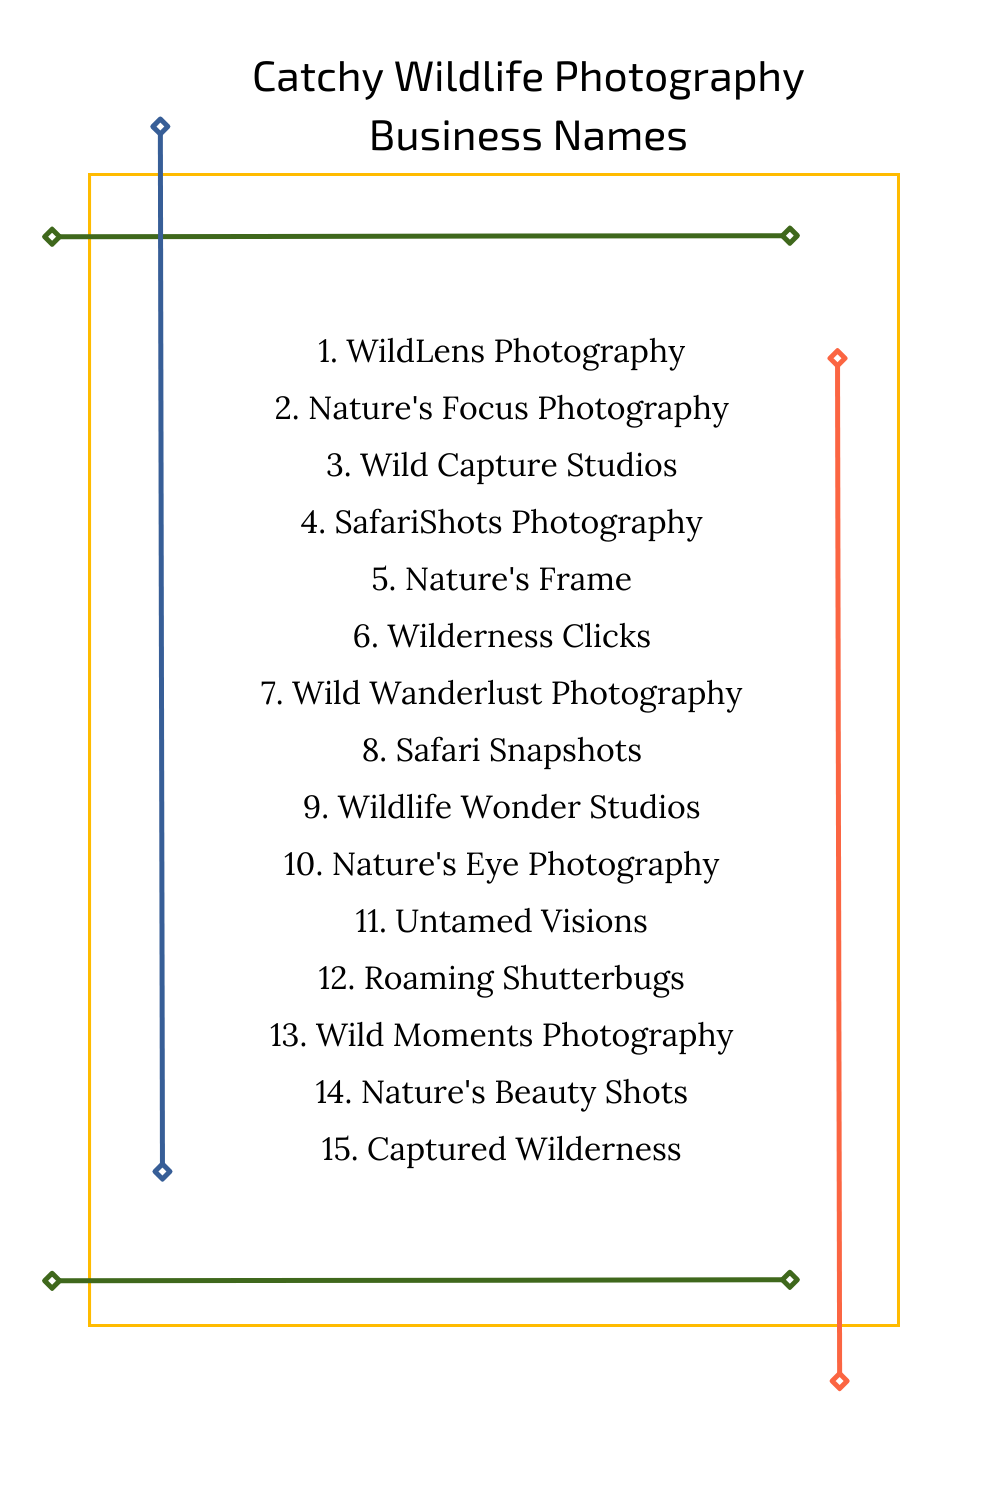 Catchy Wildlife Photography Business Names